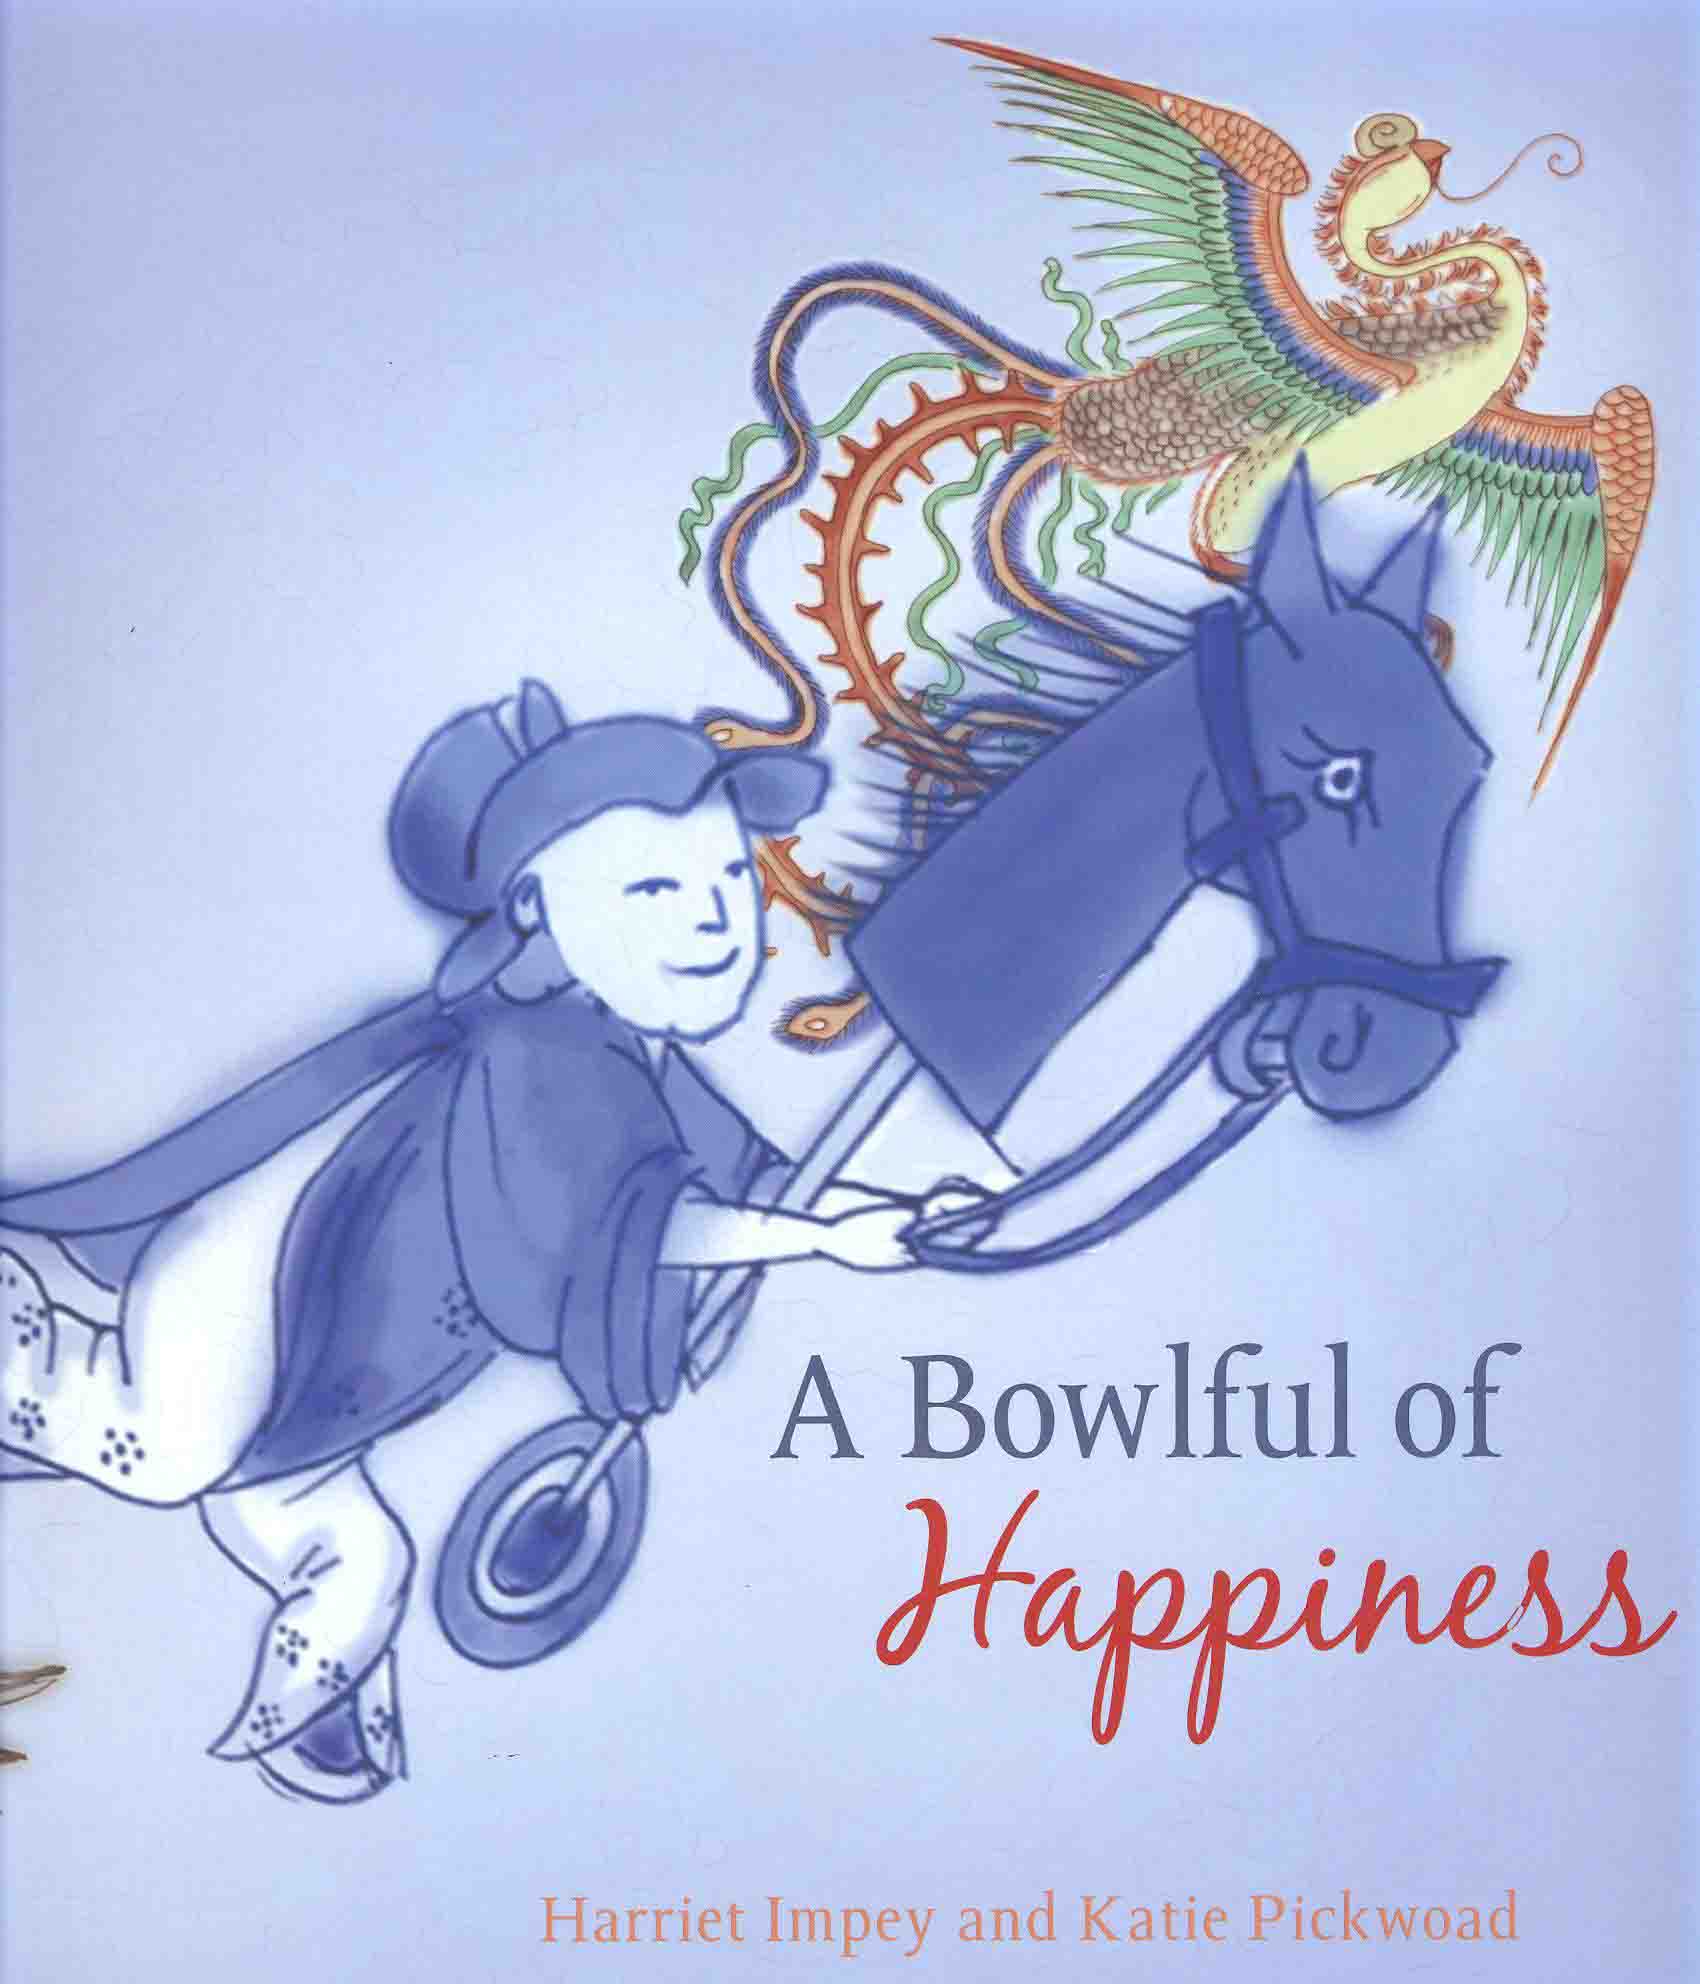 Impey, Harriet & Pickwoad, Katie - A Bowlful of Happiness